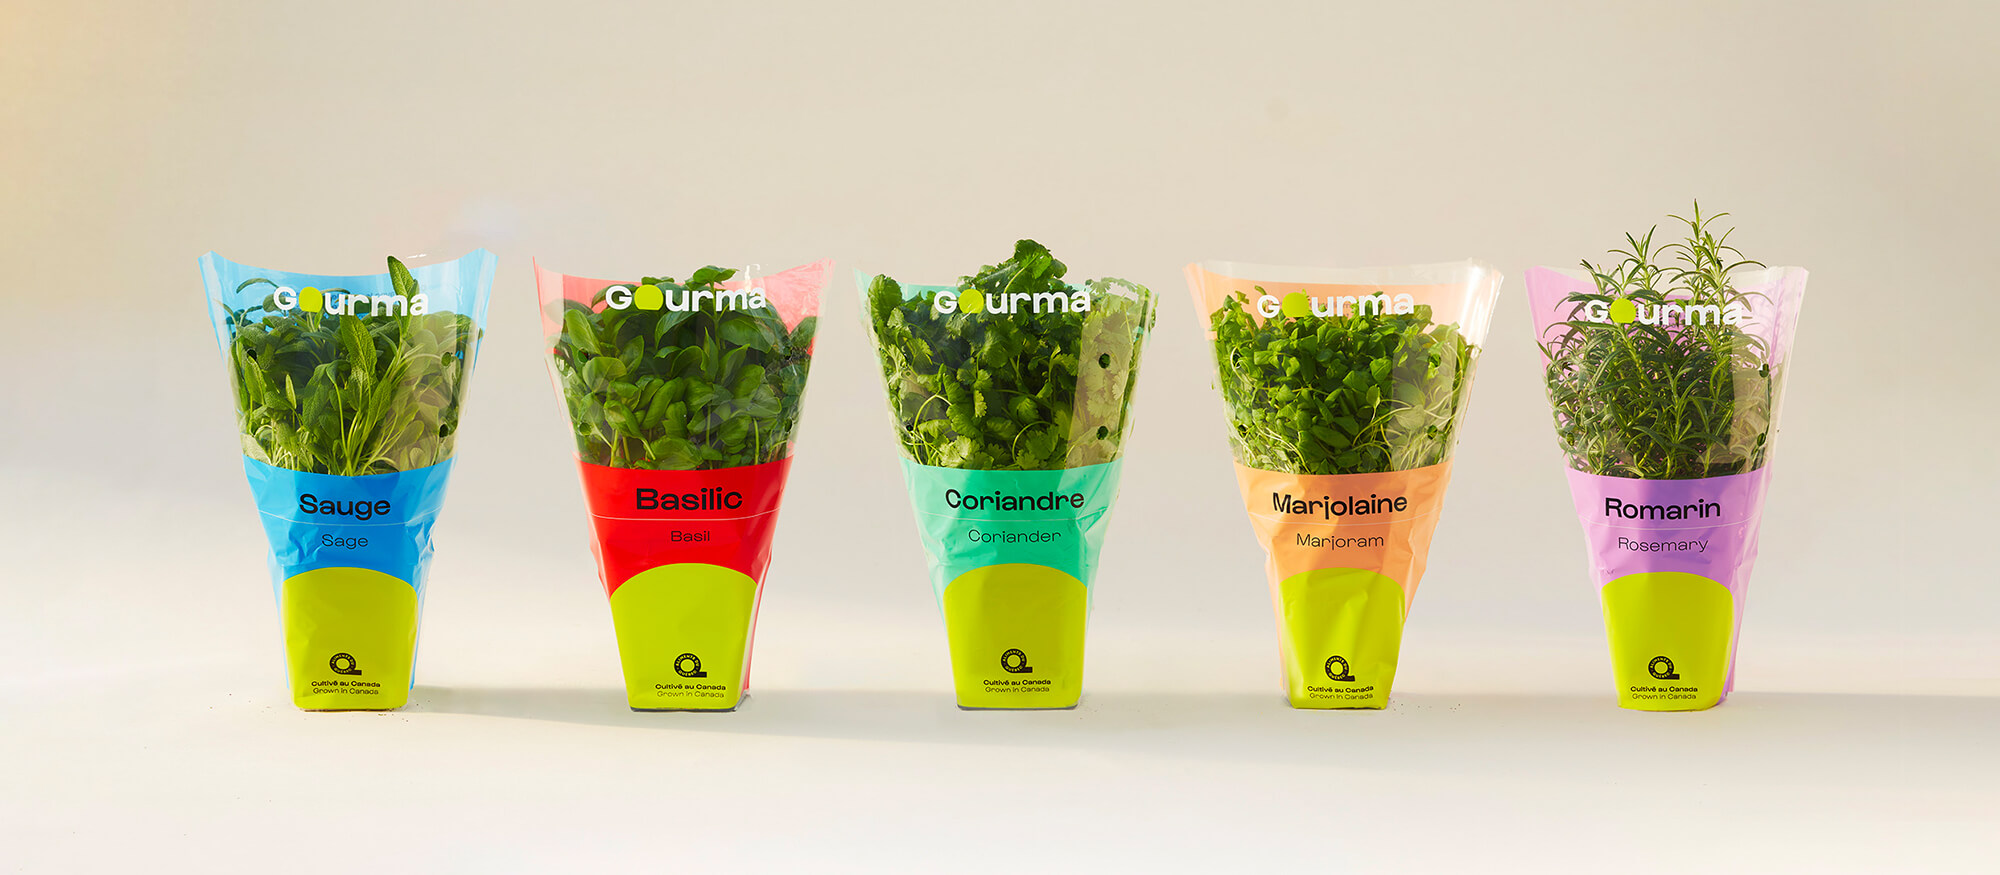 Gourma herbs are displayed in their colour coded packaging